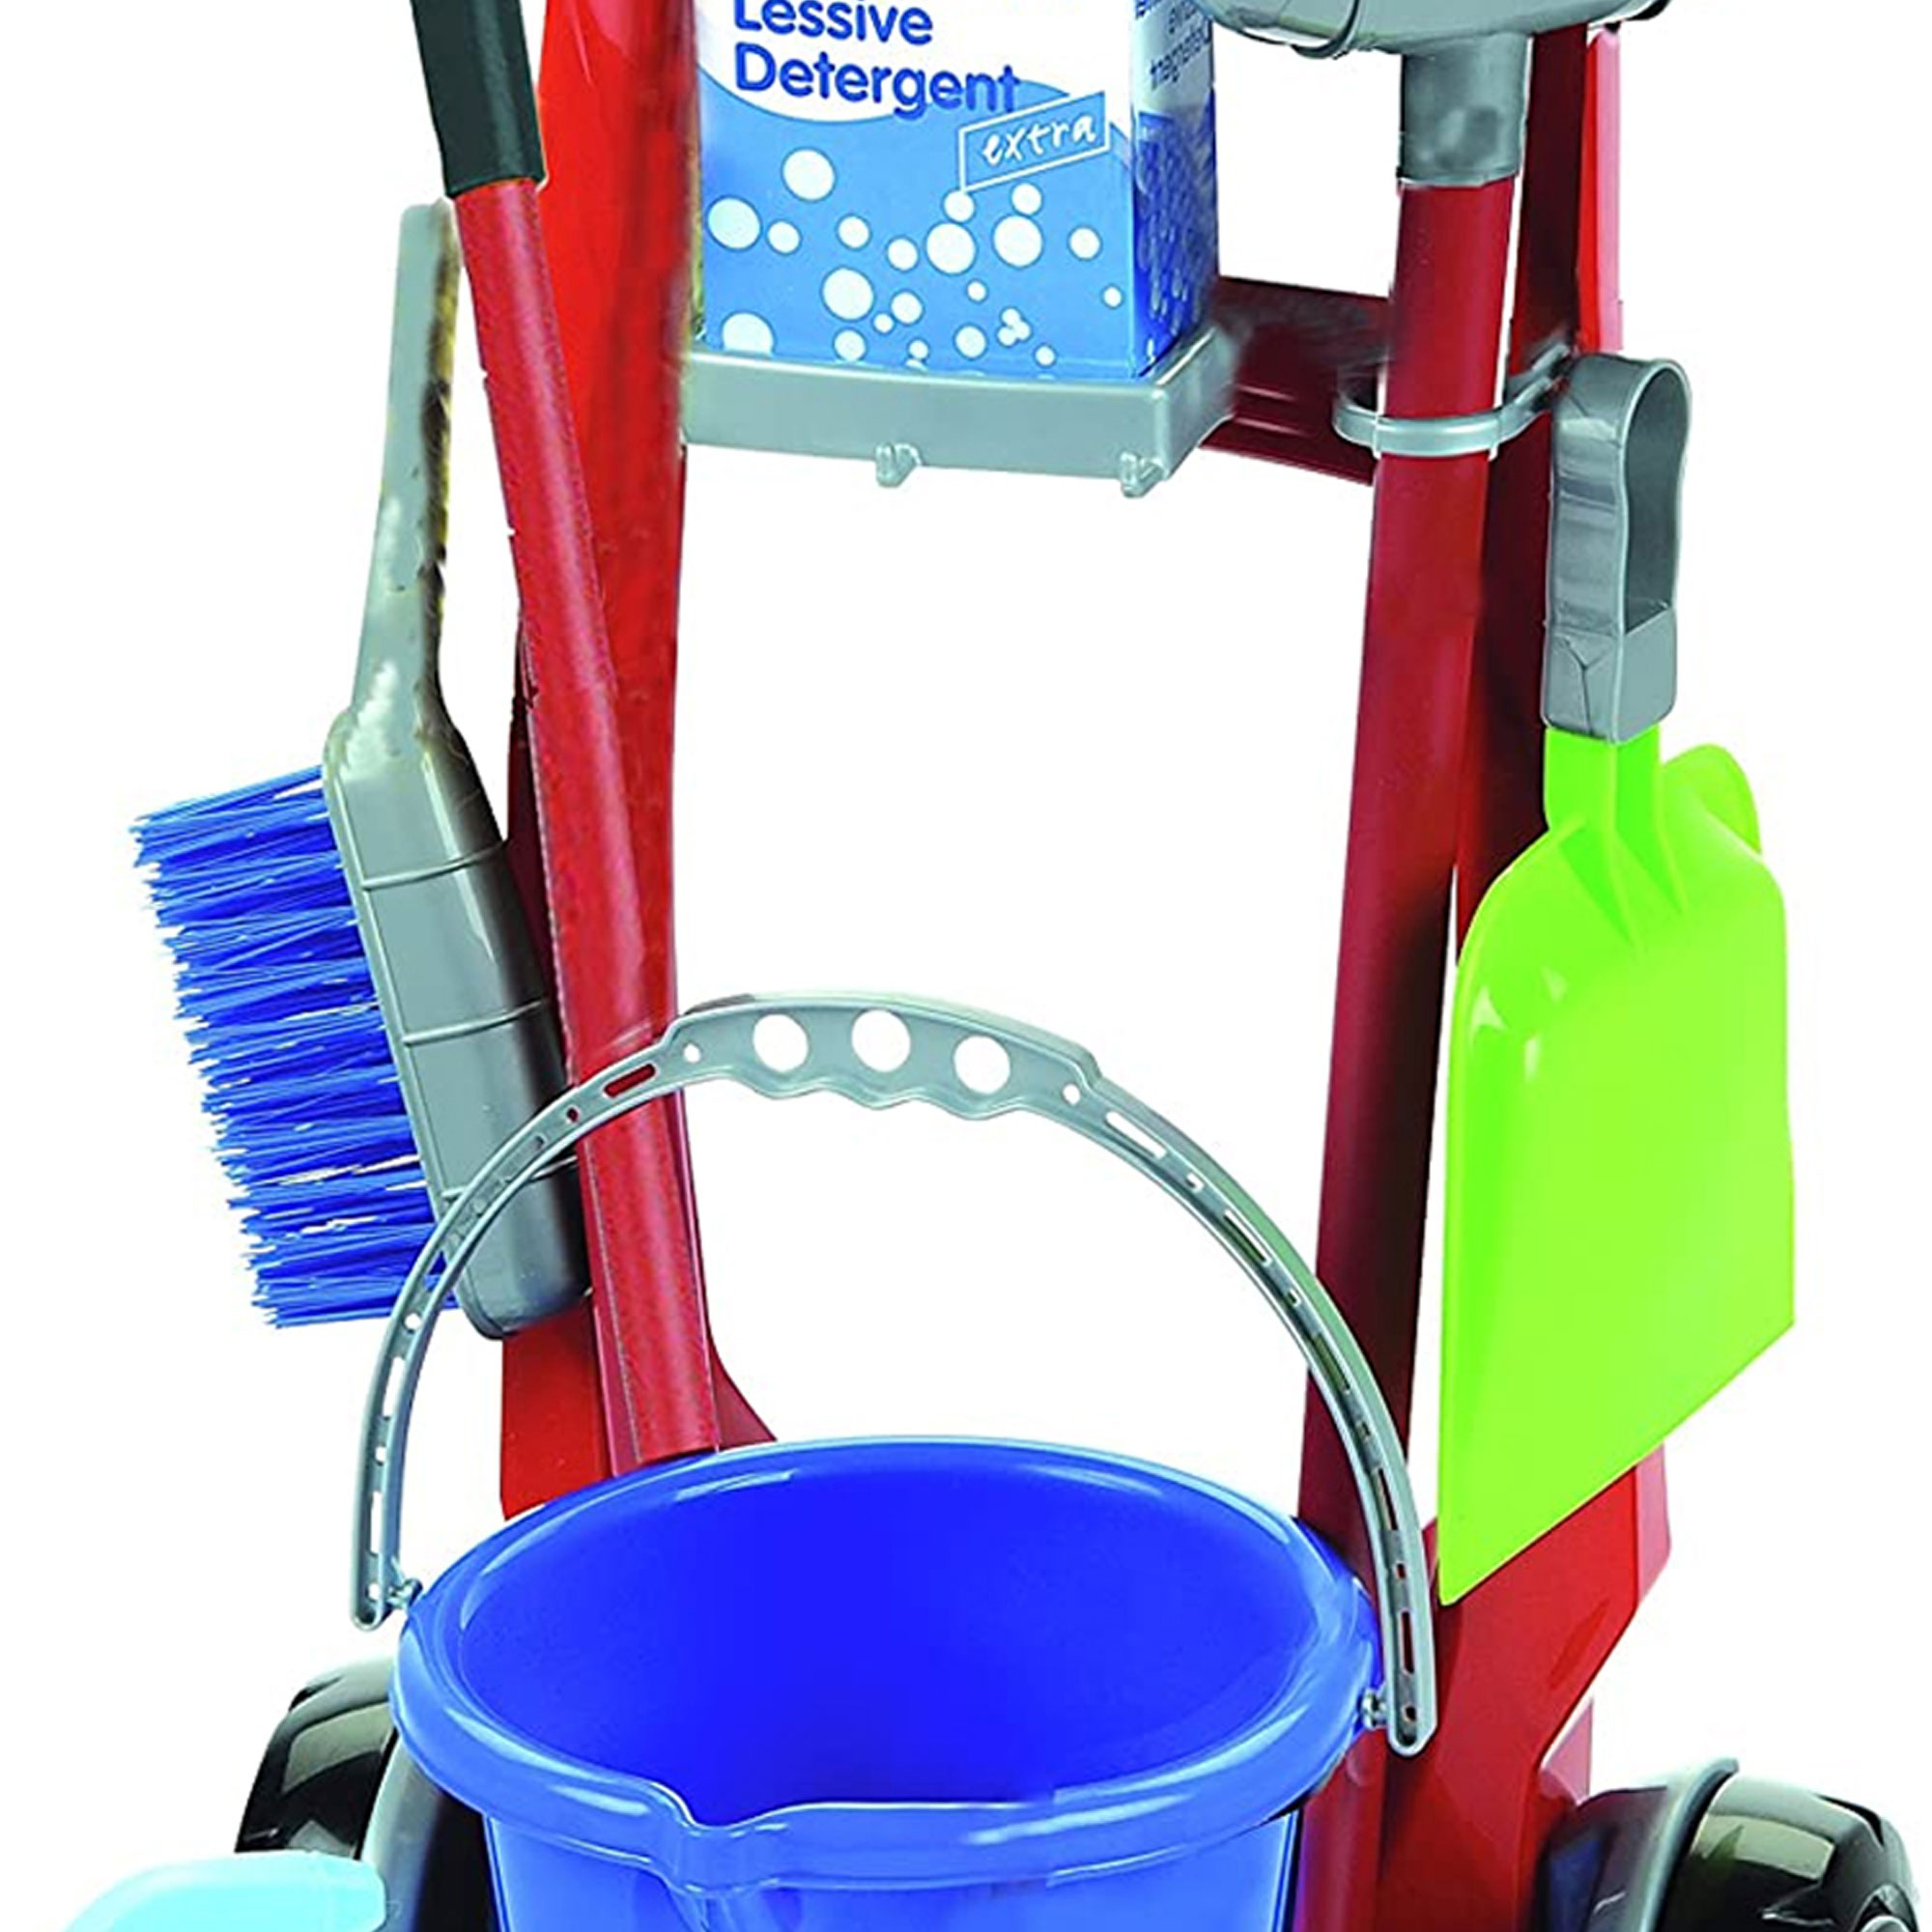 Theo Klein: Cleaning Trolley Set - Kid's 8 Piece Toy Set Includes: Trolley, Bucket, Mop, Broom, Dustpan w/ Brush, Bottle & Detergent Box, Kids Pretend Play, Ages 3+ - image 3 of 5